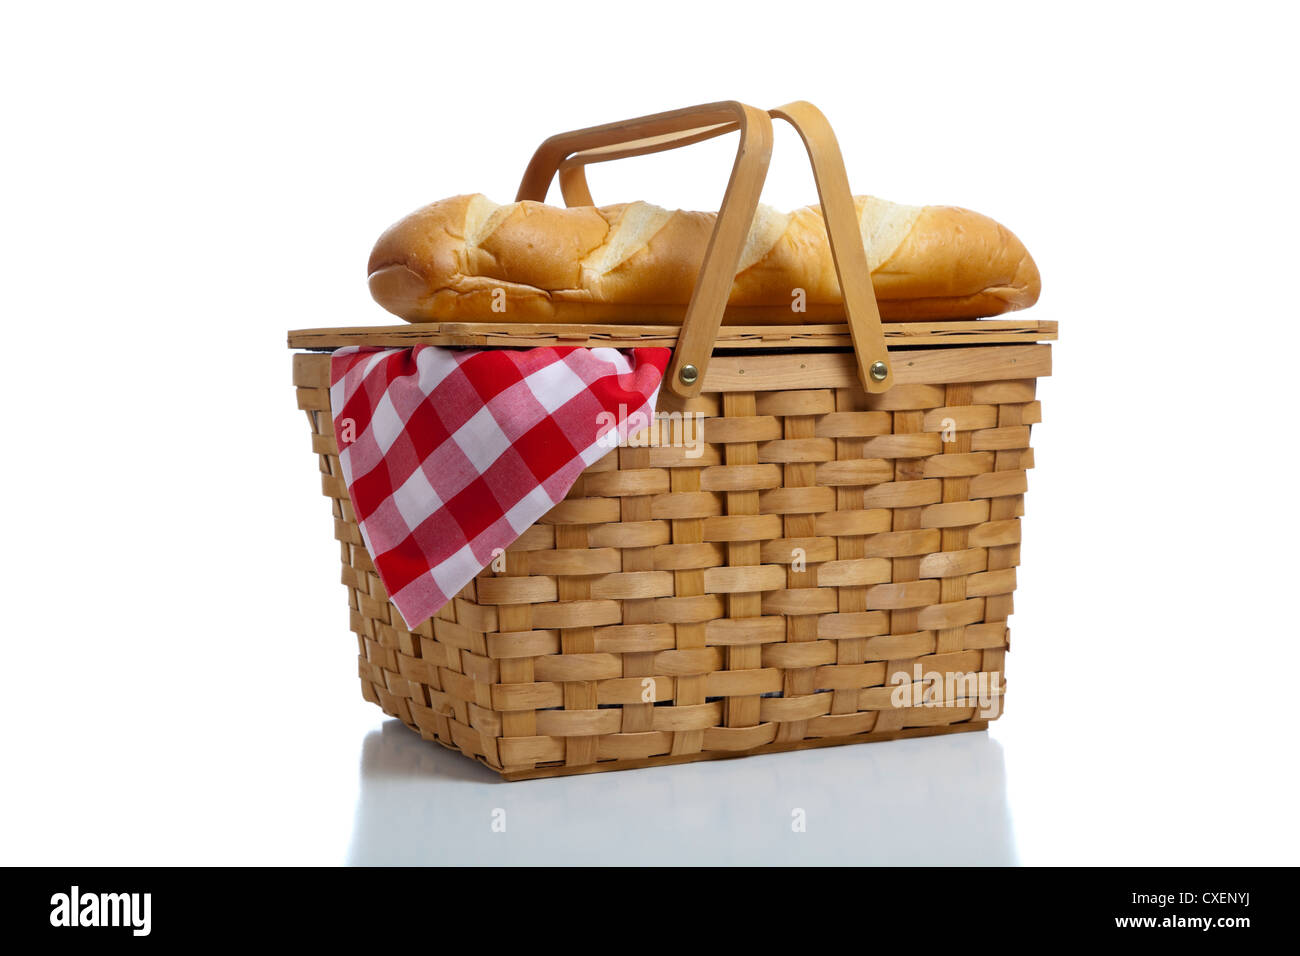 https://c8.alamy.com/comp/CXENYJ/a-wicker-picnic-basket-with-a-loaf-of-french-bread-and-a-red-gingham-CXENYJ.jpg